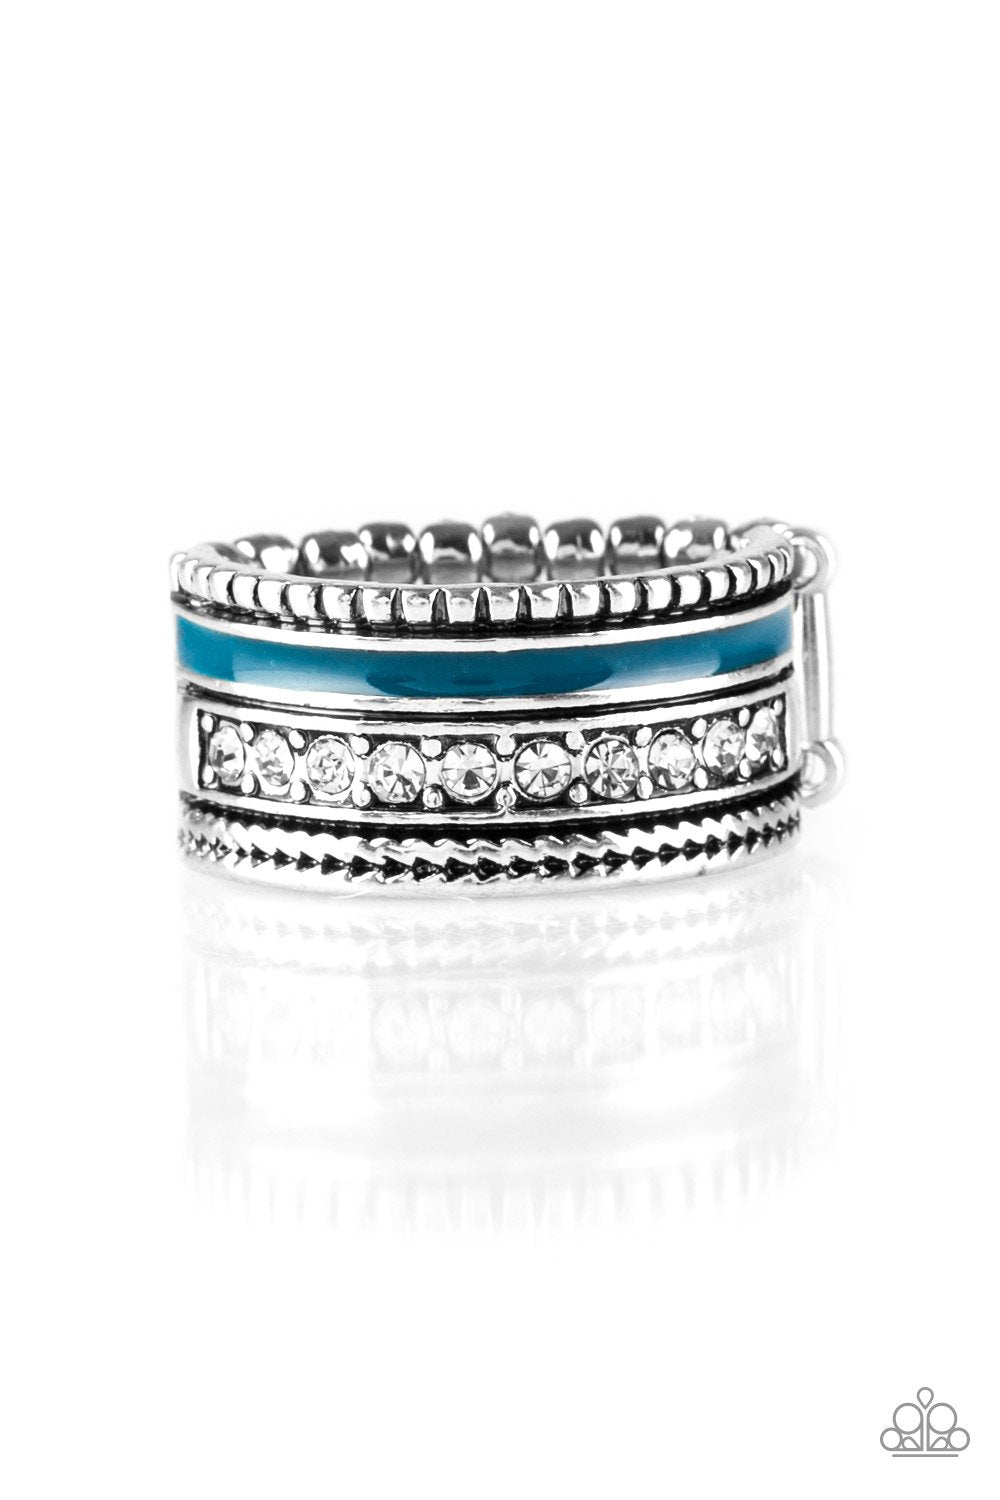 Rich Rogue Blue and Silver Ring - Paparazzi Accessories - lightbox -CarasShop.com - $5 Jewelry by Cara Jewels